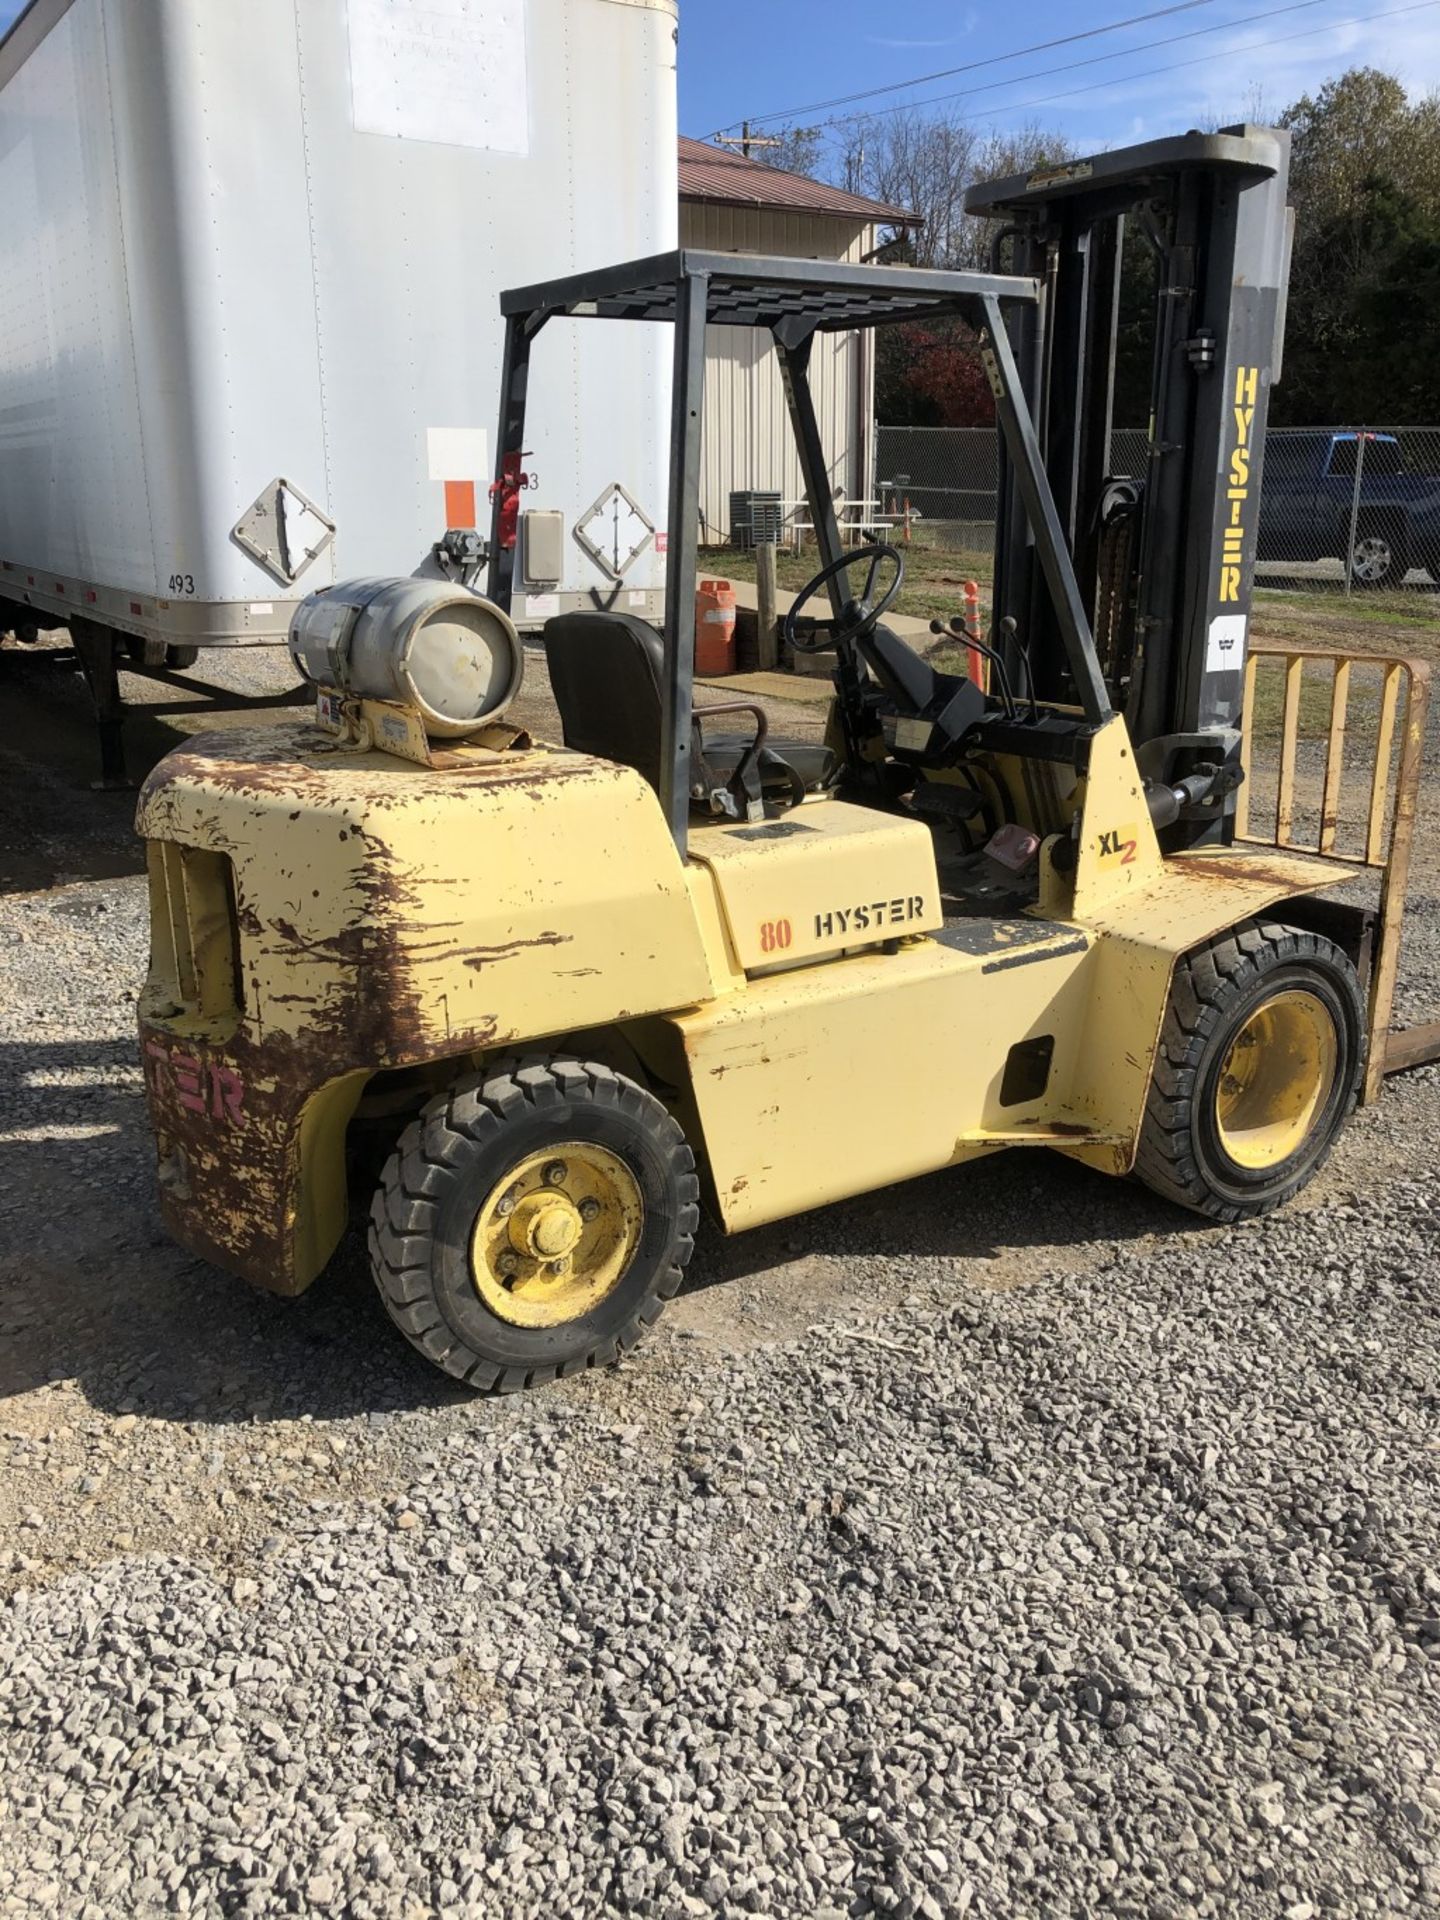 Hyster 8000 lb Forklift, Dual Wheel,3 Stage Mast Side Shift, 3,000 Hrs, LP Gas - Image 3 of 5